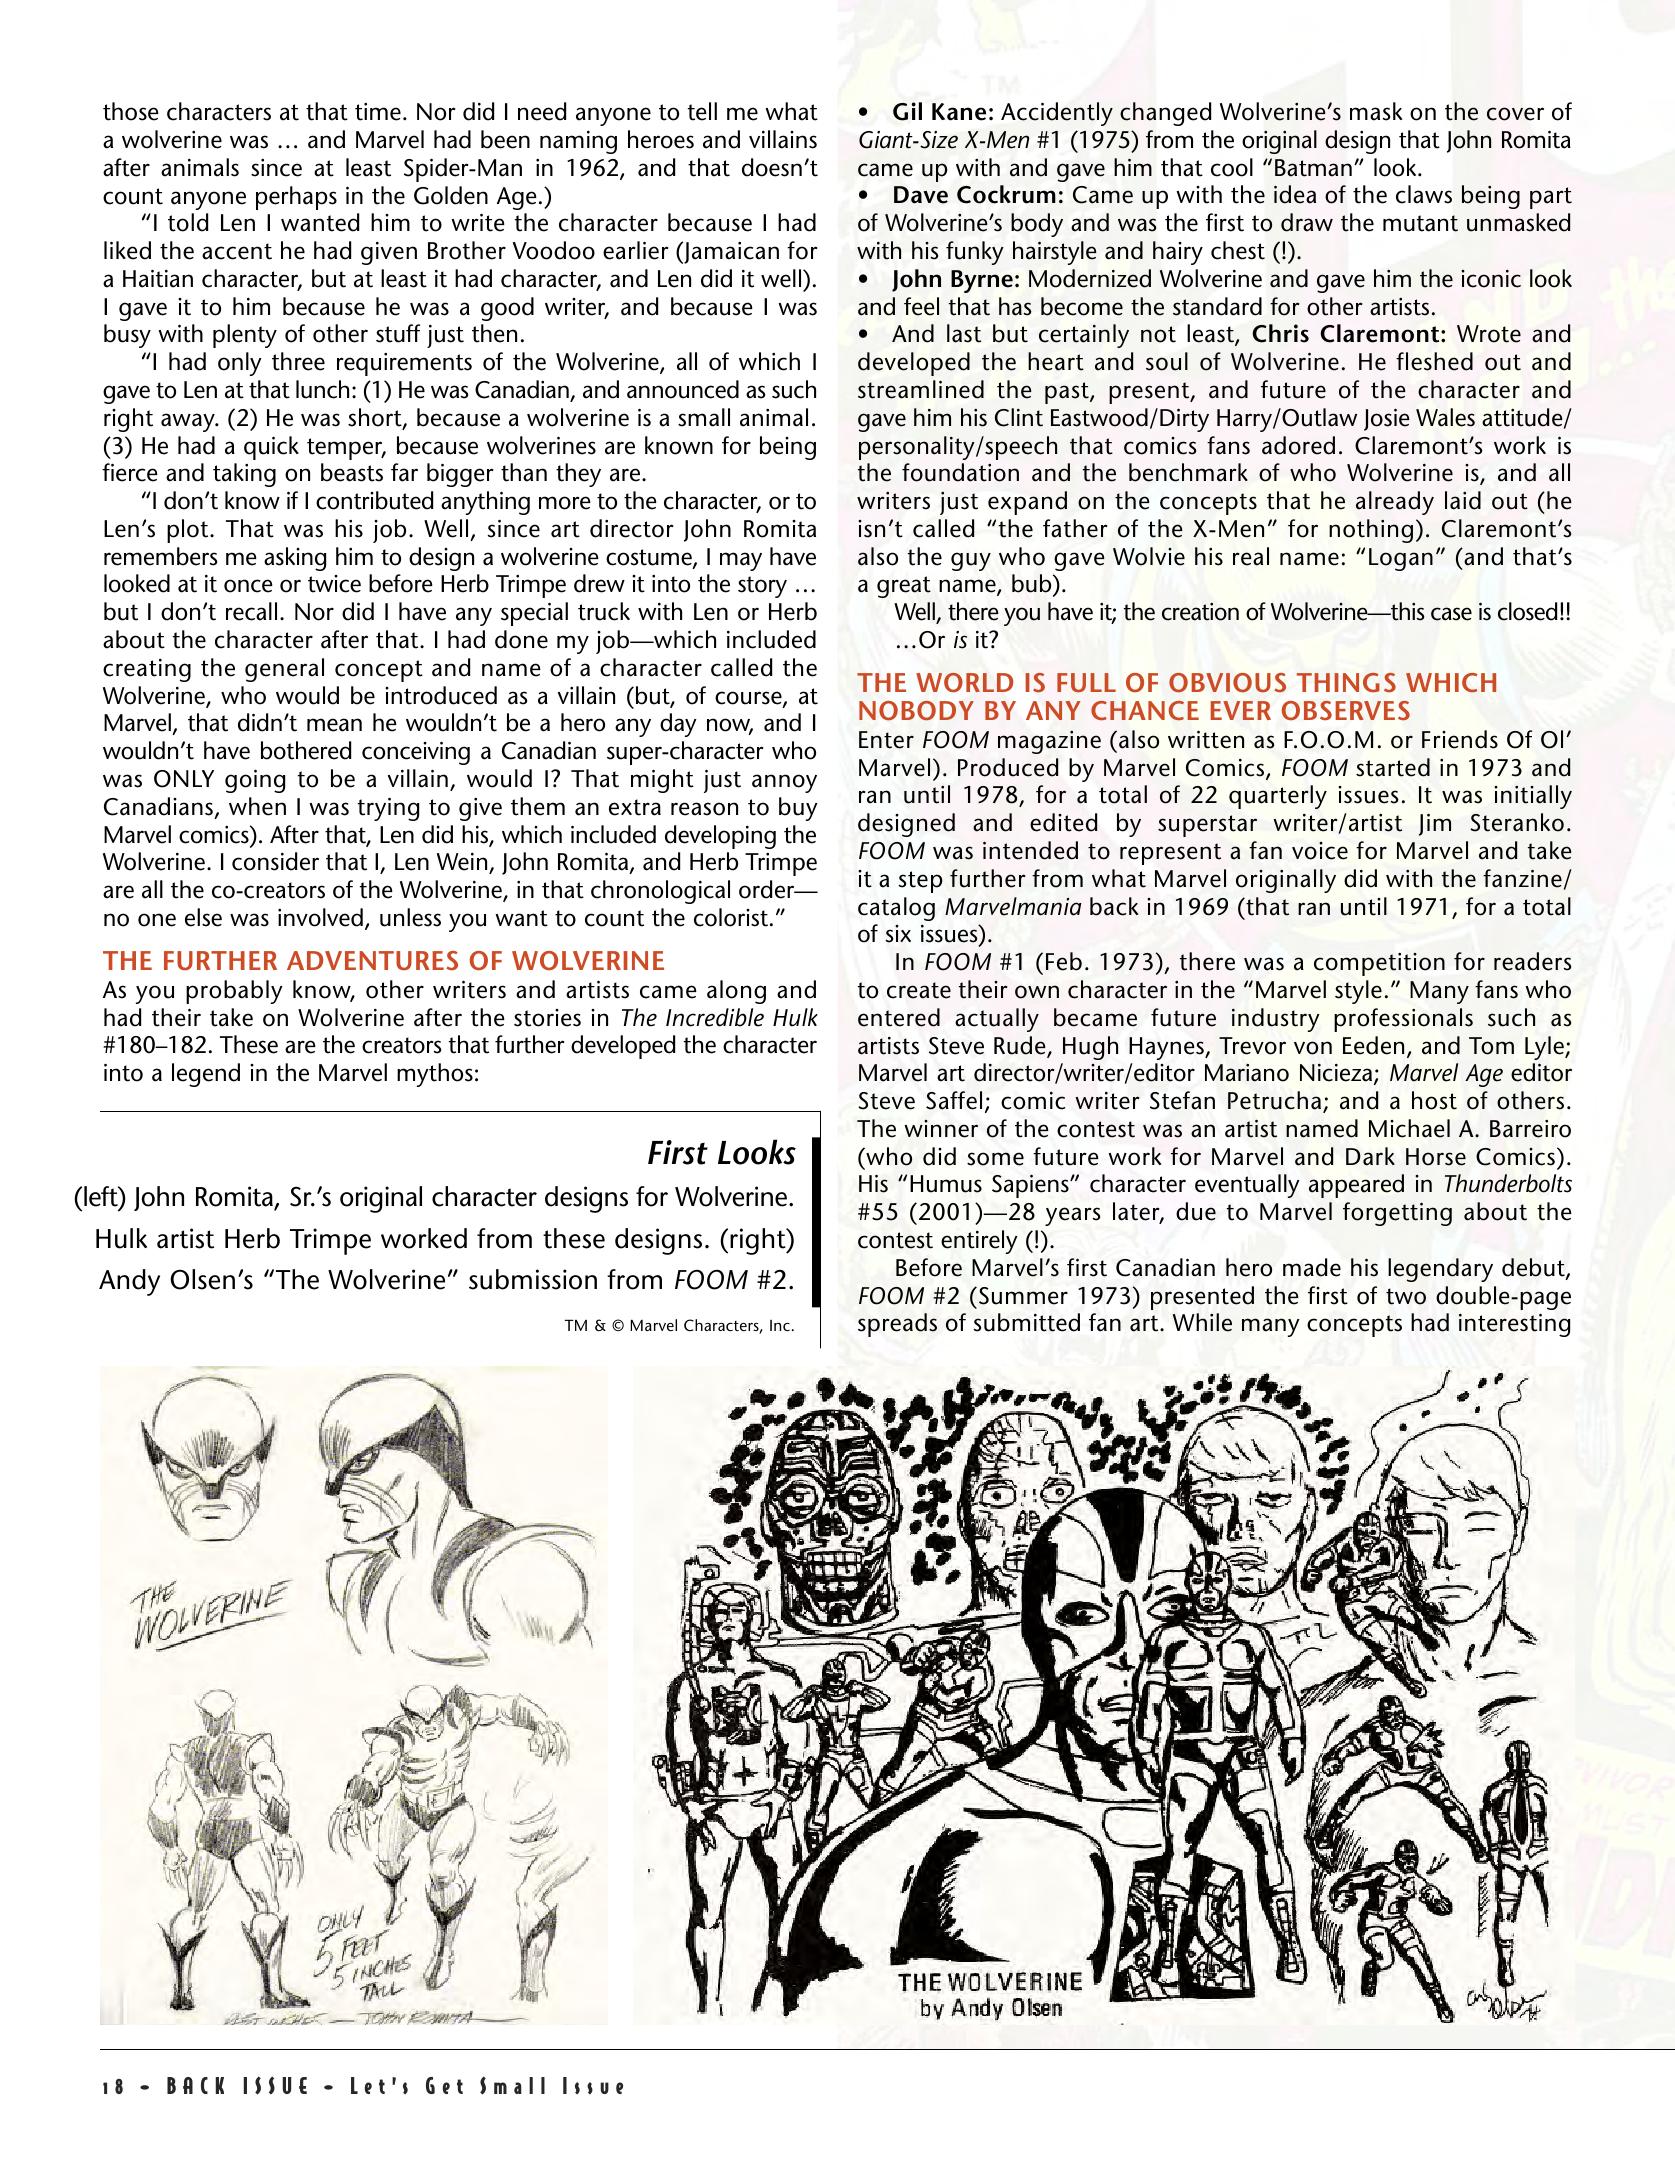 Read online Back Issue comic -  Issue #76 - 20